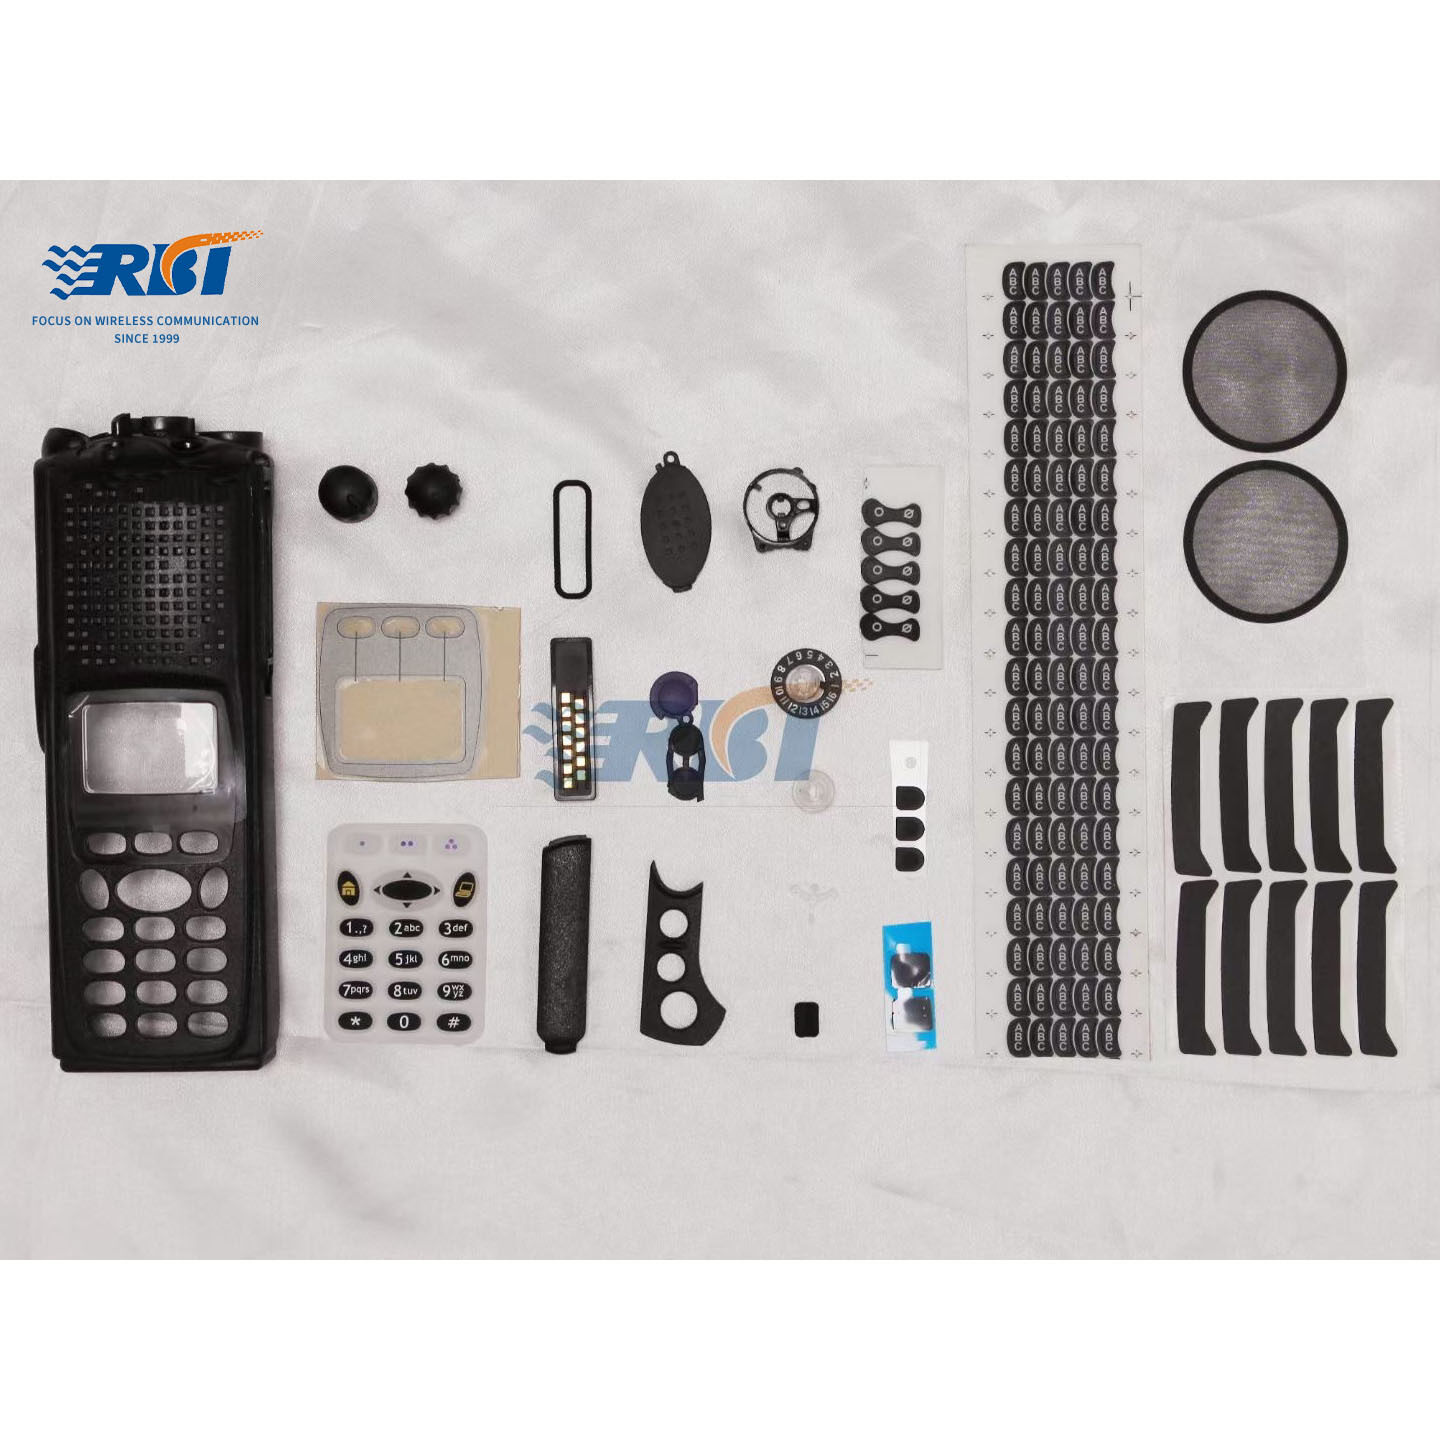 GP338 case complete set with speaker + cable key board display LCD,XIR P8668  Housing,XiR M8220,TK3217 Housing,TK-3107 face shell